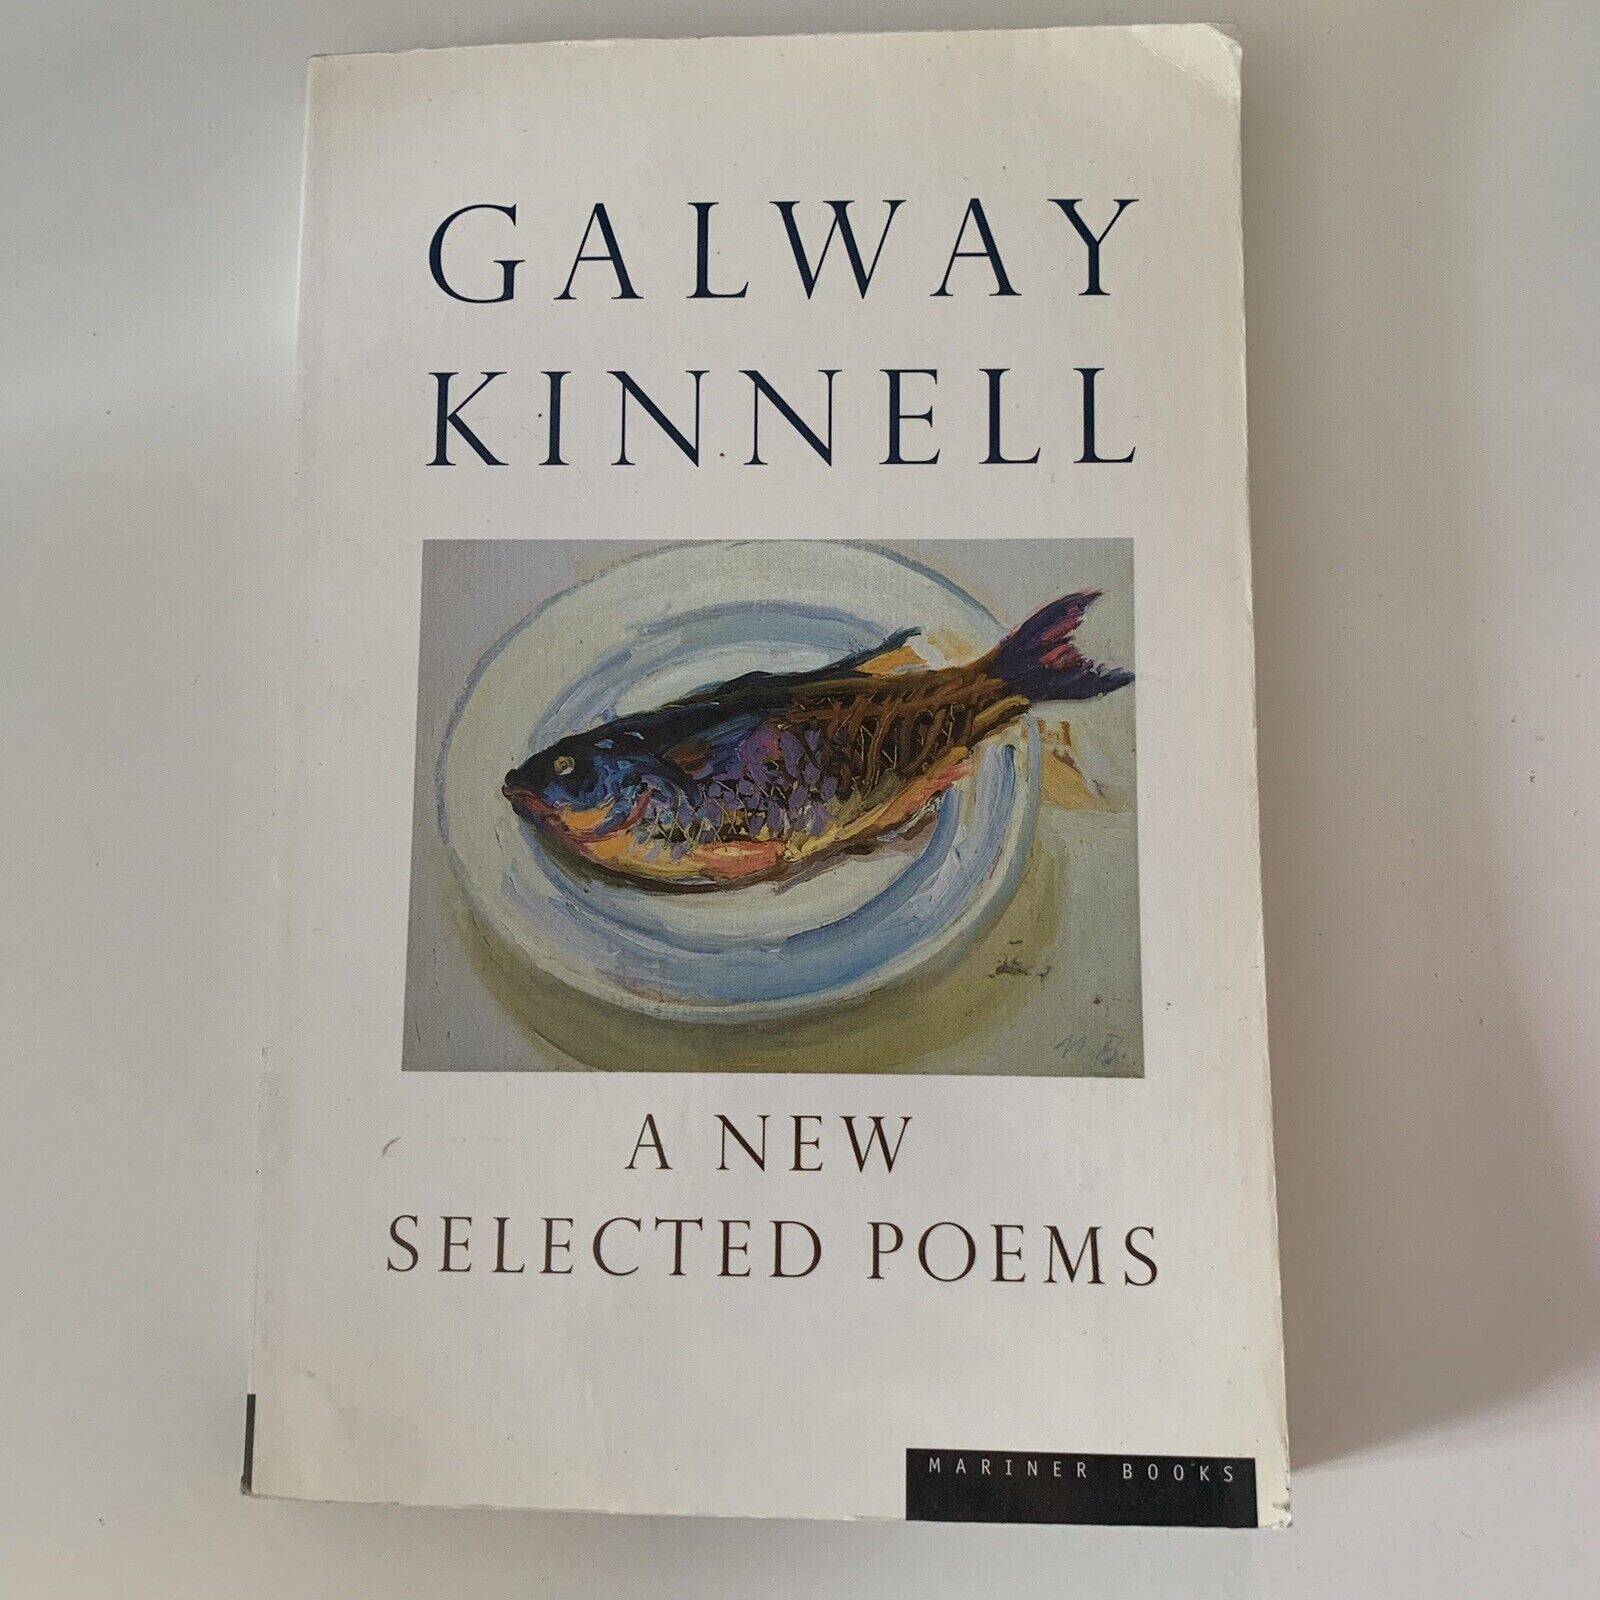 A New Selected Poems (SIGNED by the poet), Galway Kinnell, SIGNED Paperback 2001